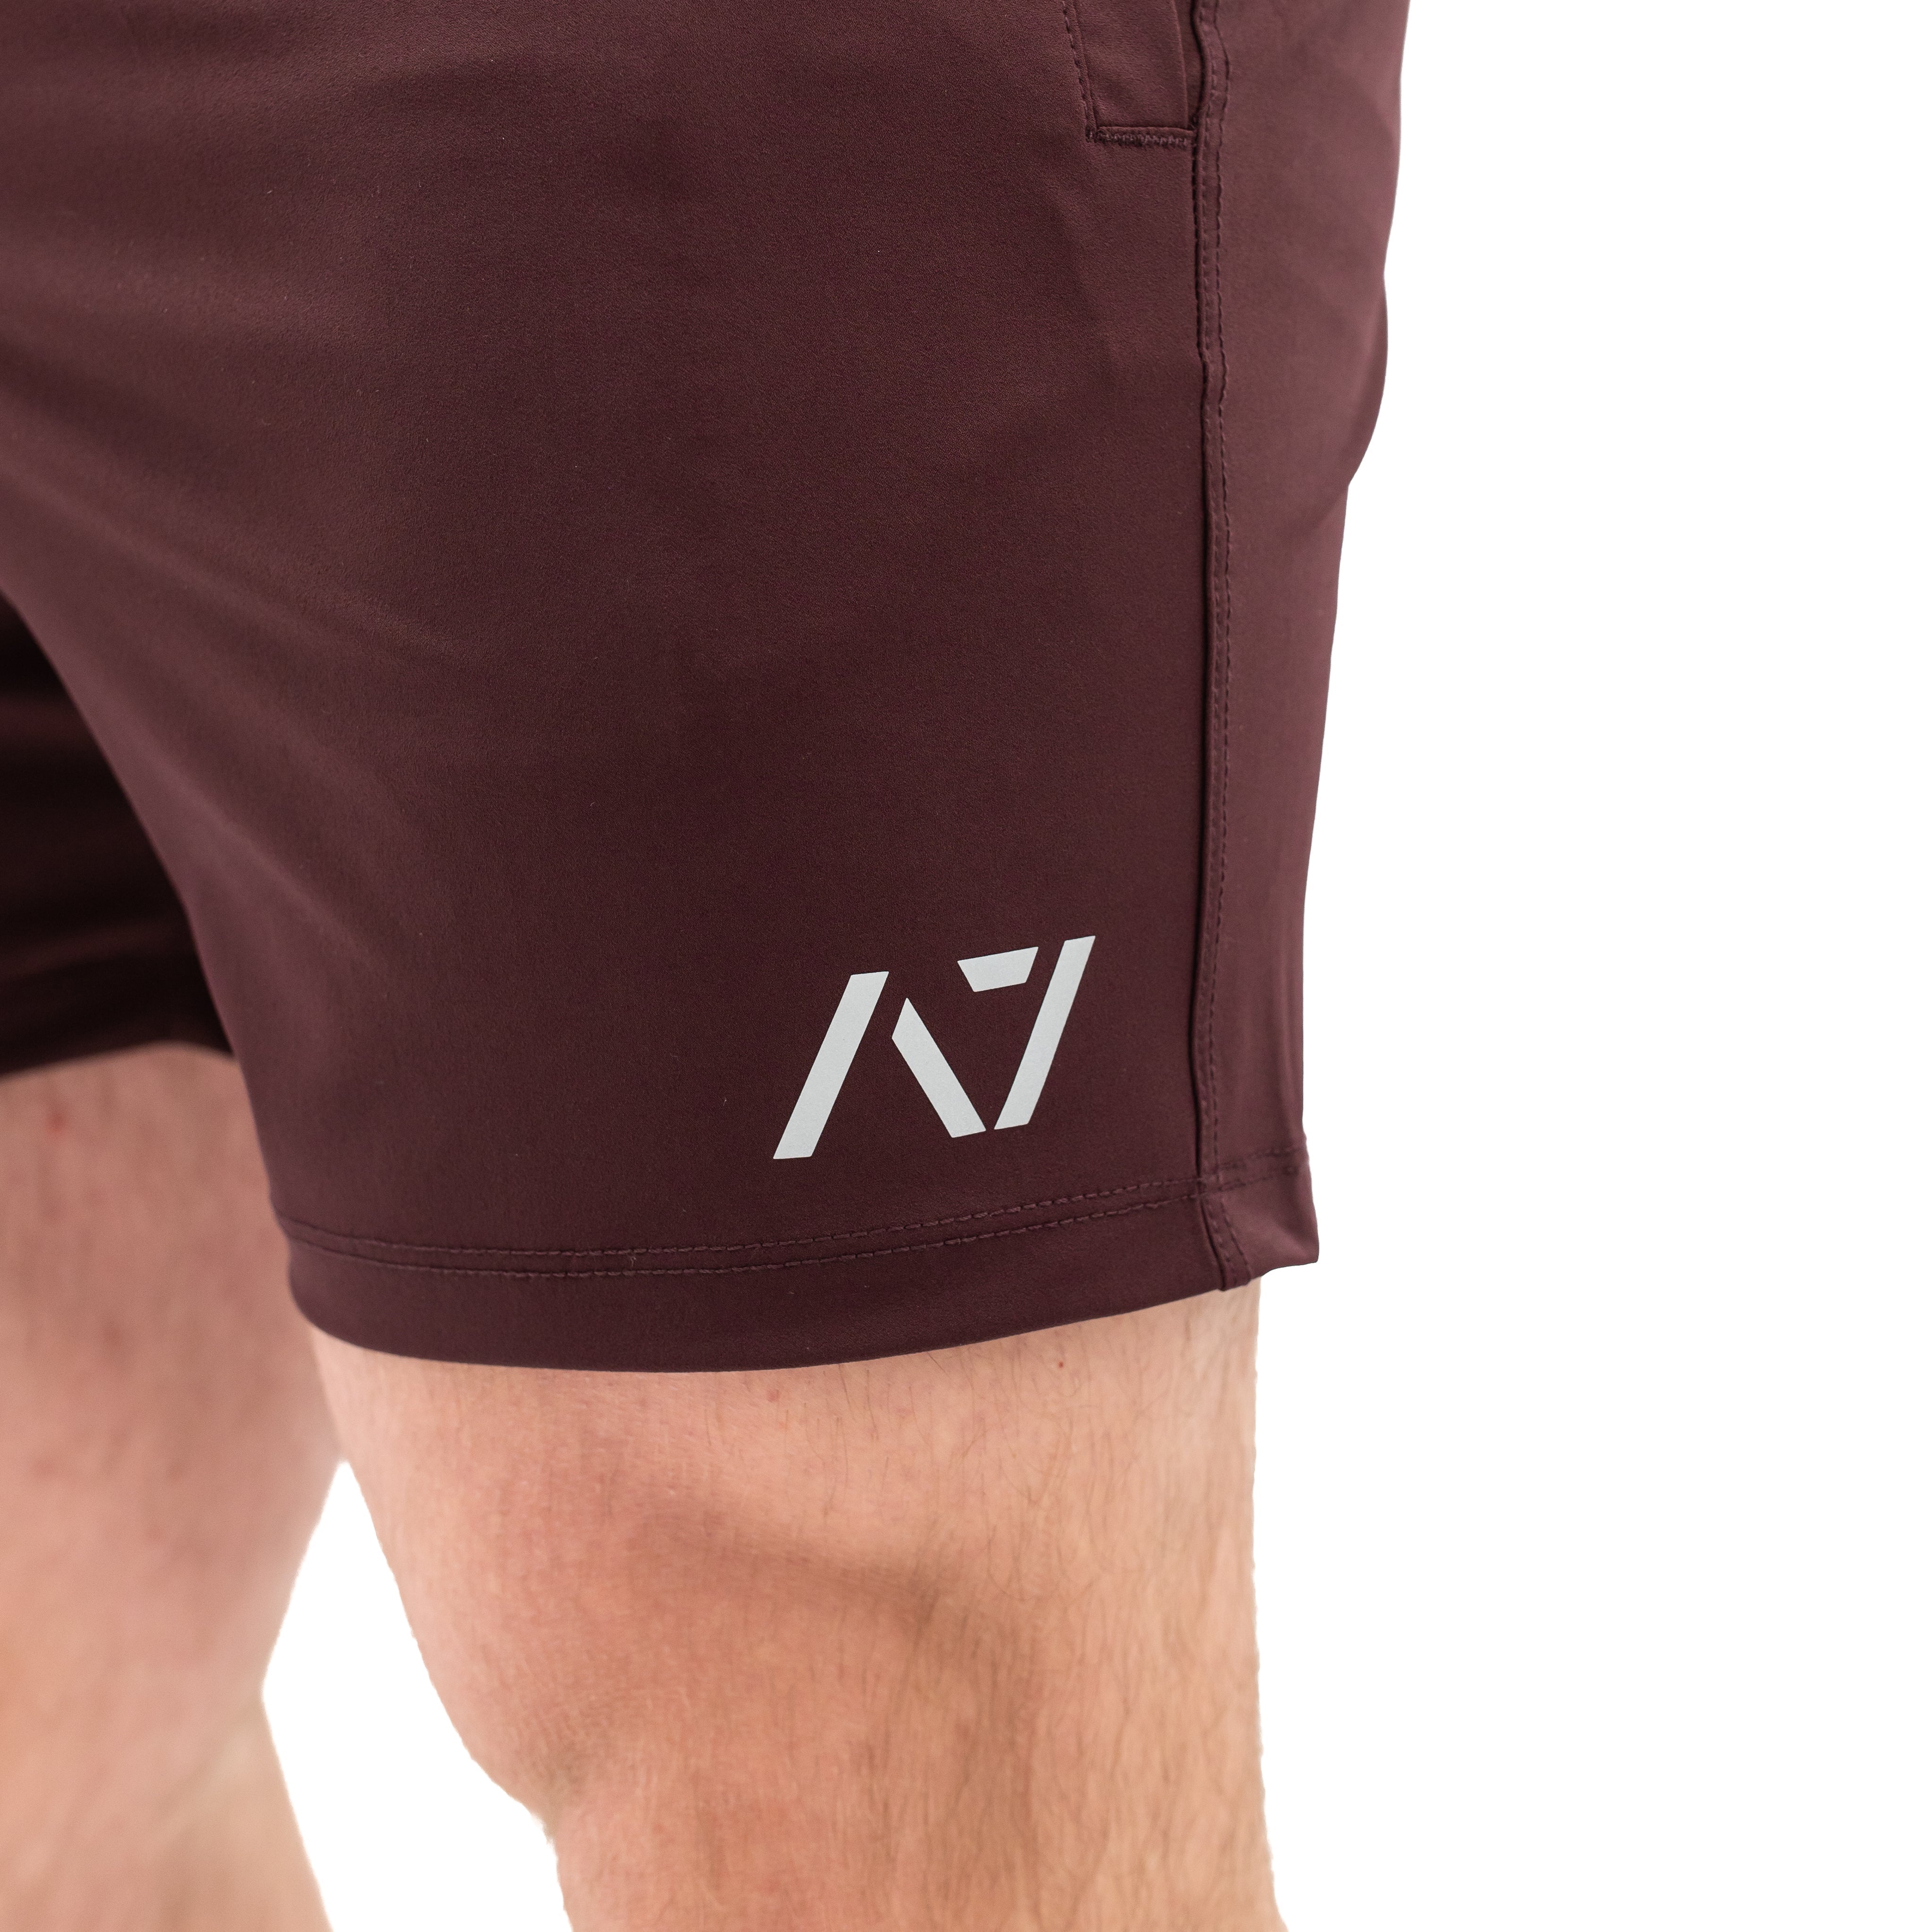 Mahogany 360-GO shorts were created to provide the flexibility for all the movements in your training while offering the comfort and fit you have come to love through our Centre Squat shorts. Purchase 360-GO Squat shorts from A7 UK and A7 Europe. 360-GO shorts are perfect for powerlifting and weightlifting training. Available in UK and Europe including France, Italy, Germany, the Netherlands, Sweden and Poland.